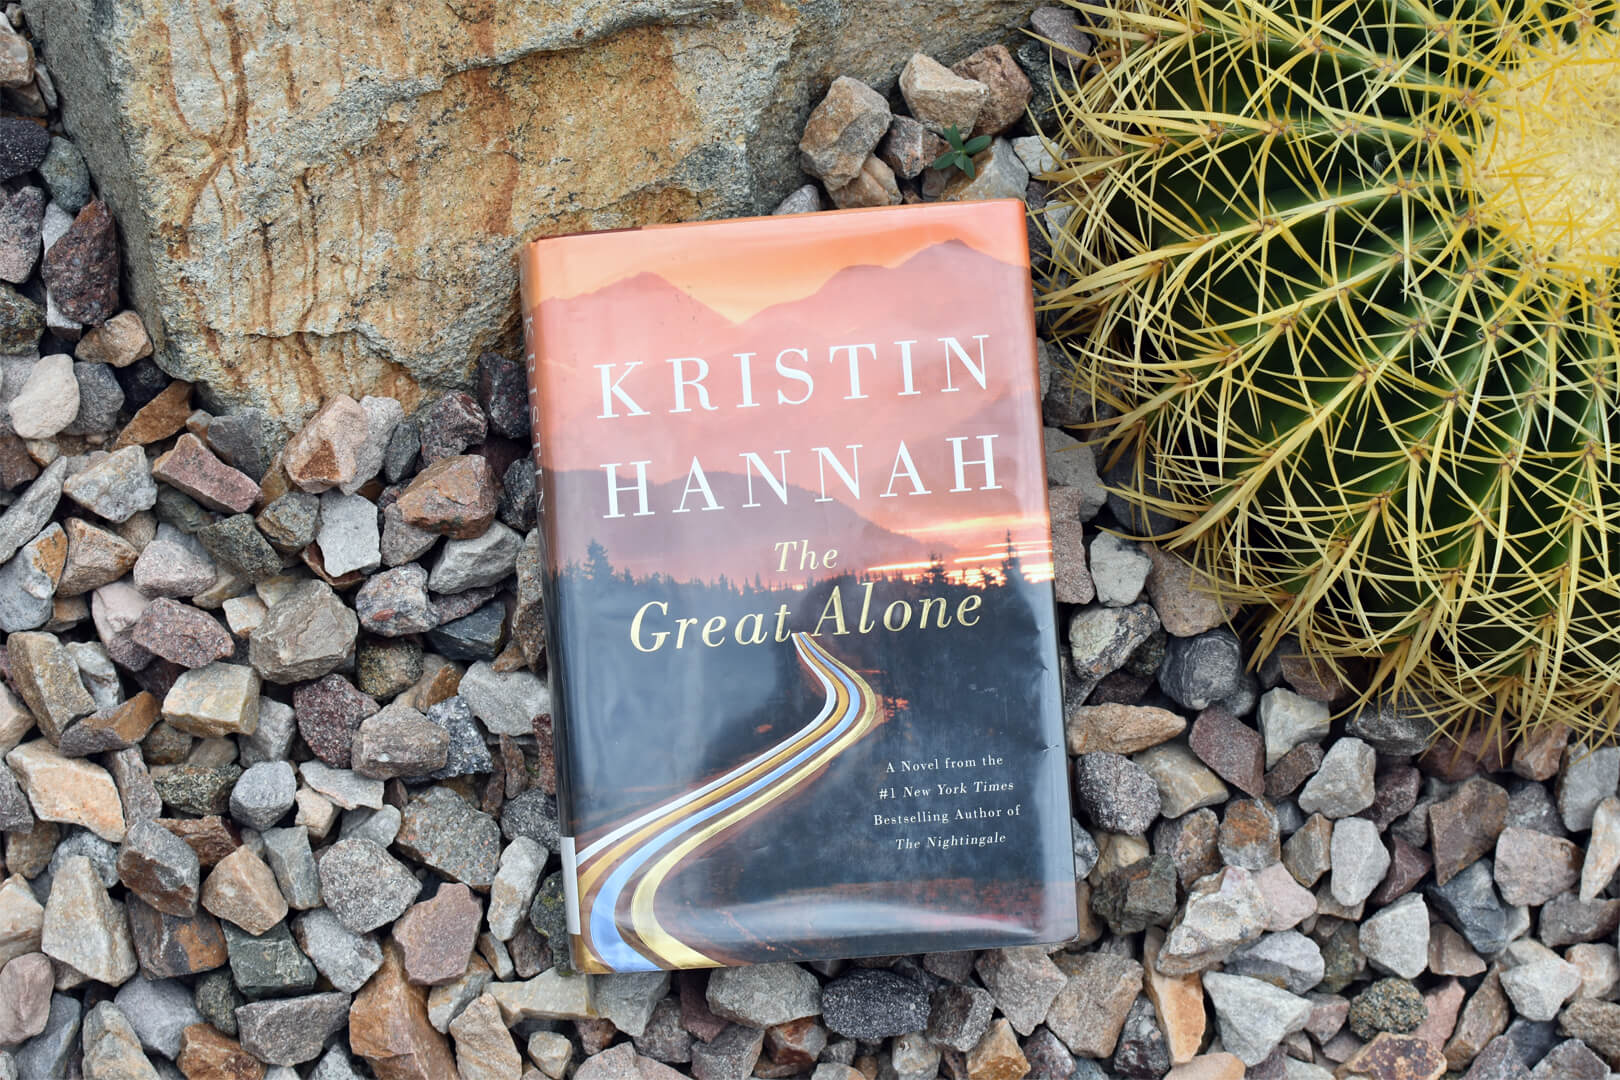 Preview: The Great Alone by Kristin Hannah